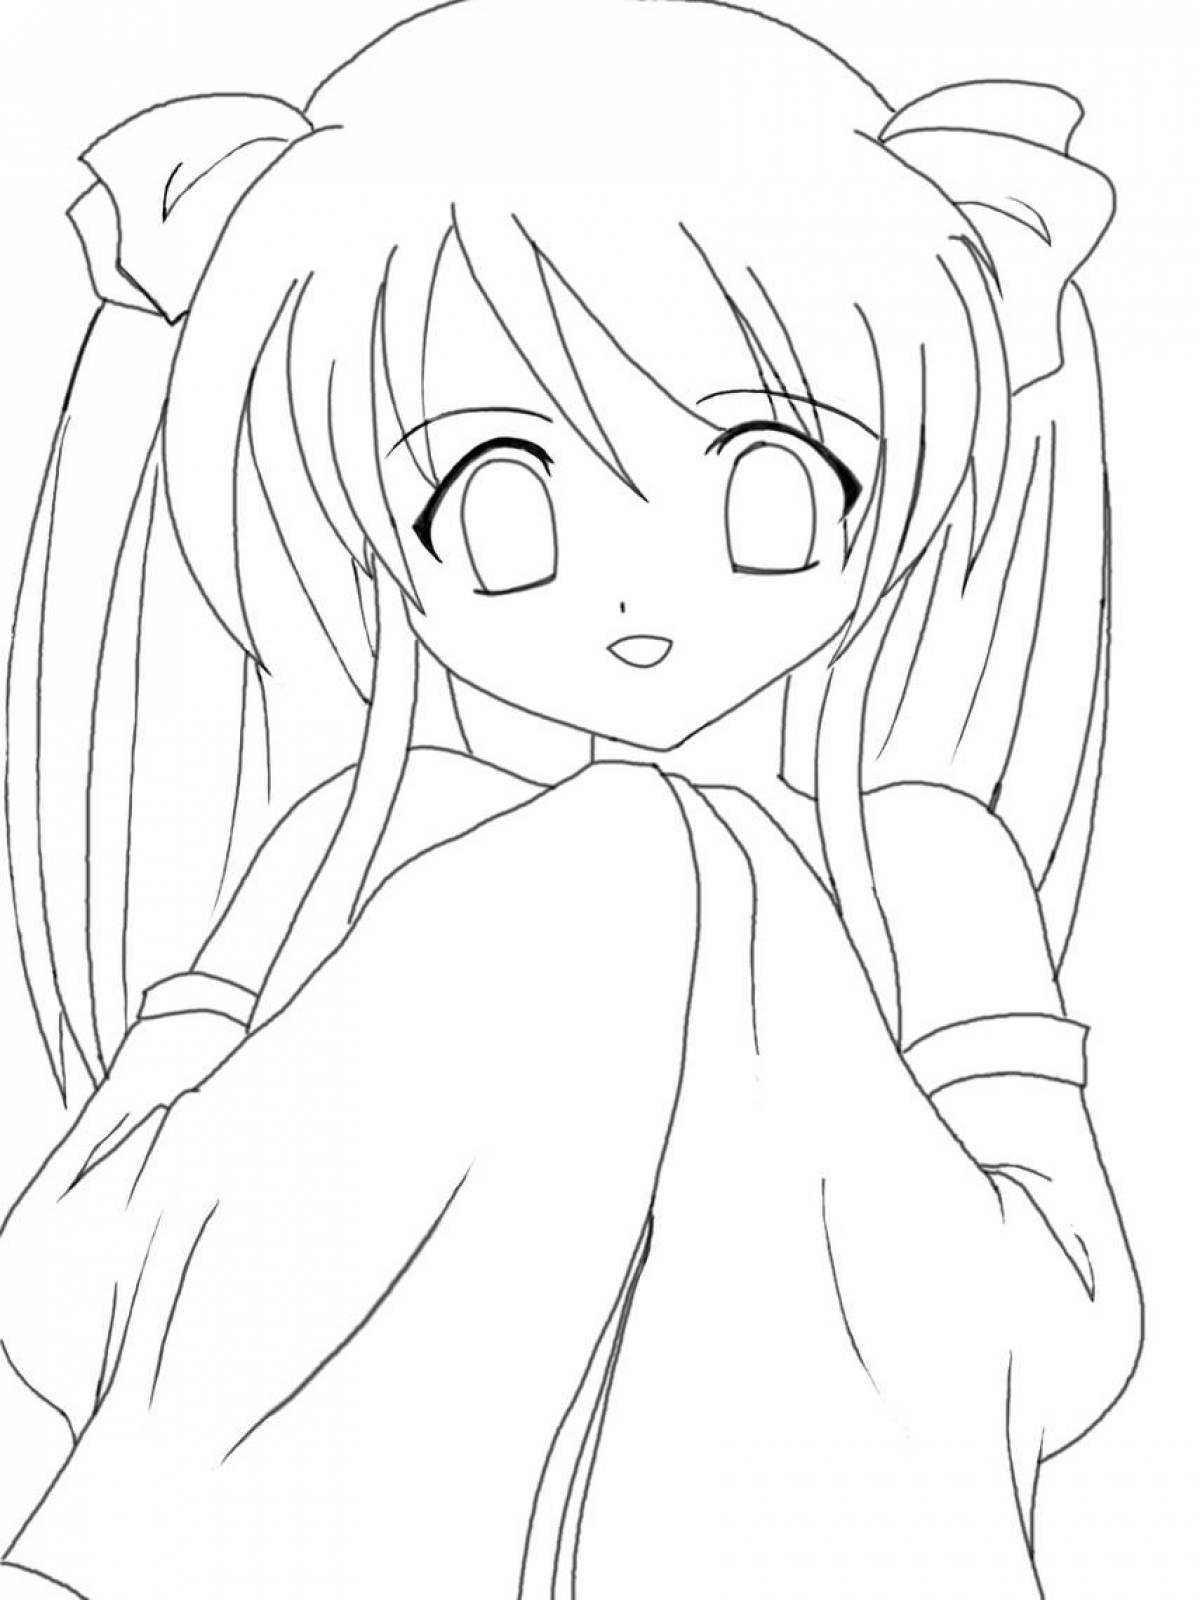 Exciting anime girl coloring book